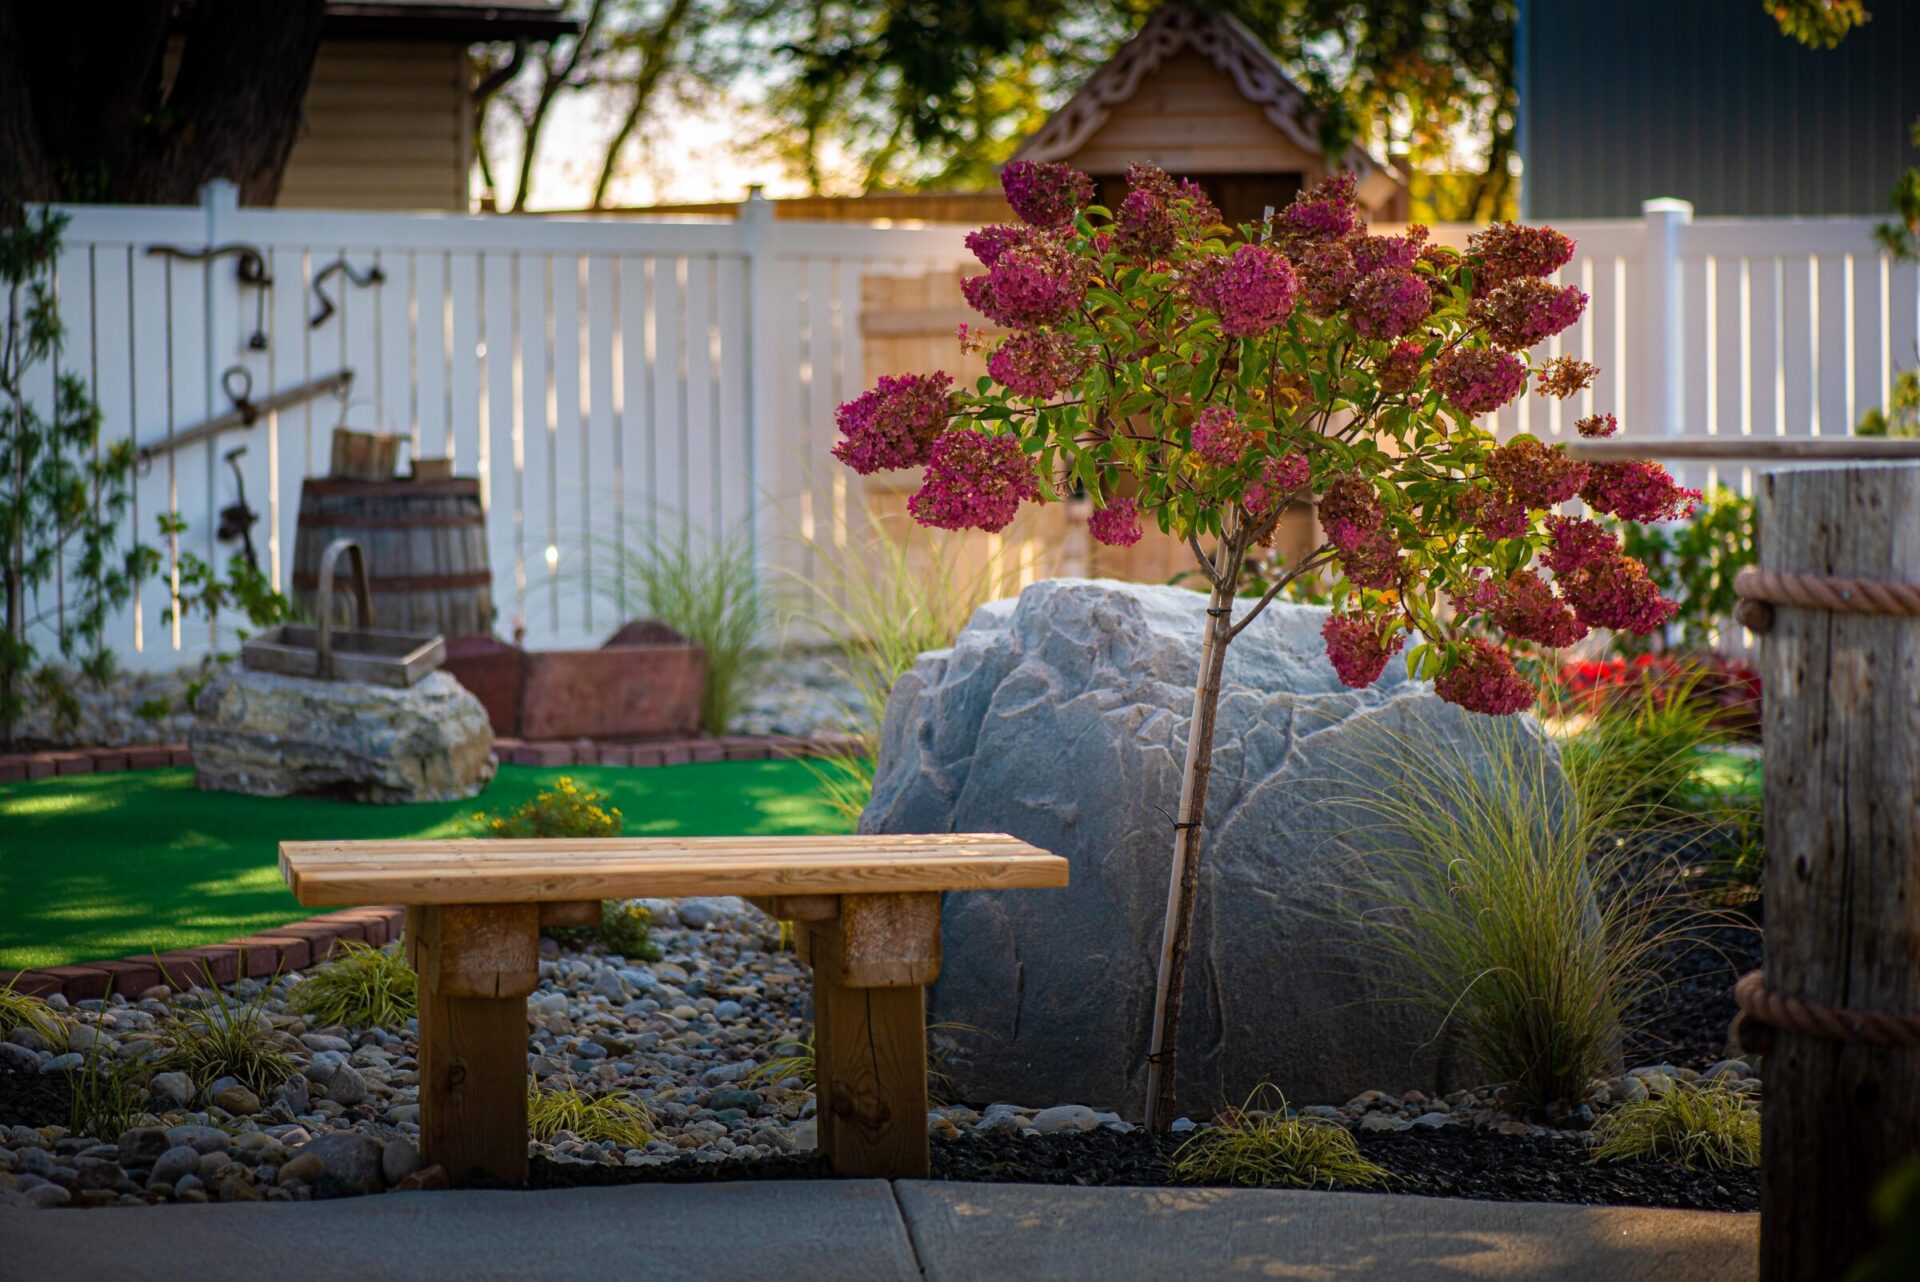 The image features a serene garden with a flowering shrub, a wooden bench, rocks, grasses, a miniature windmill, and a white picket fence.